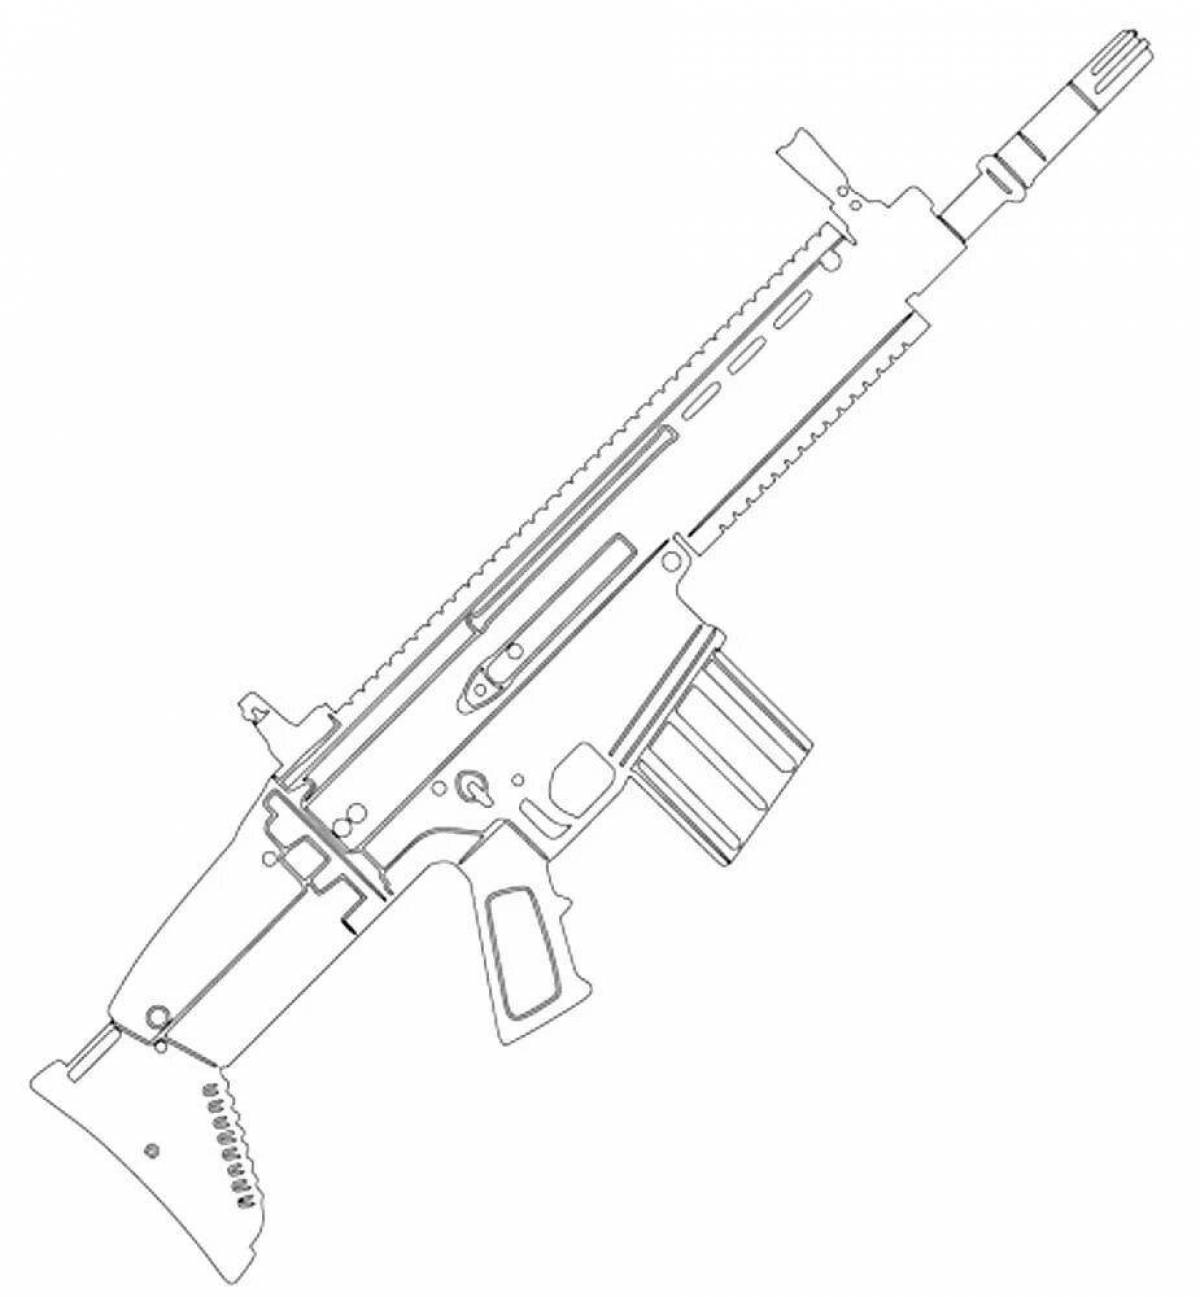 Coloring page with colorful weapons